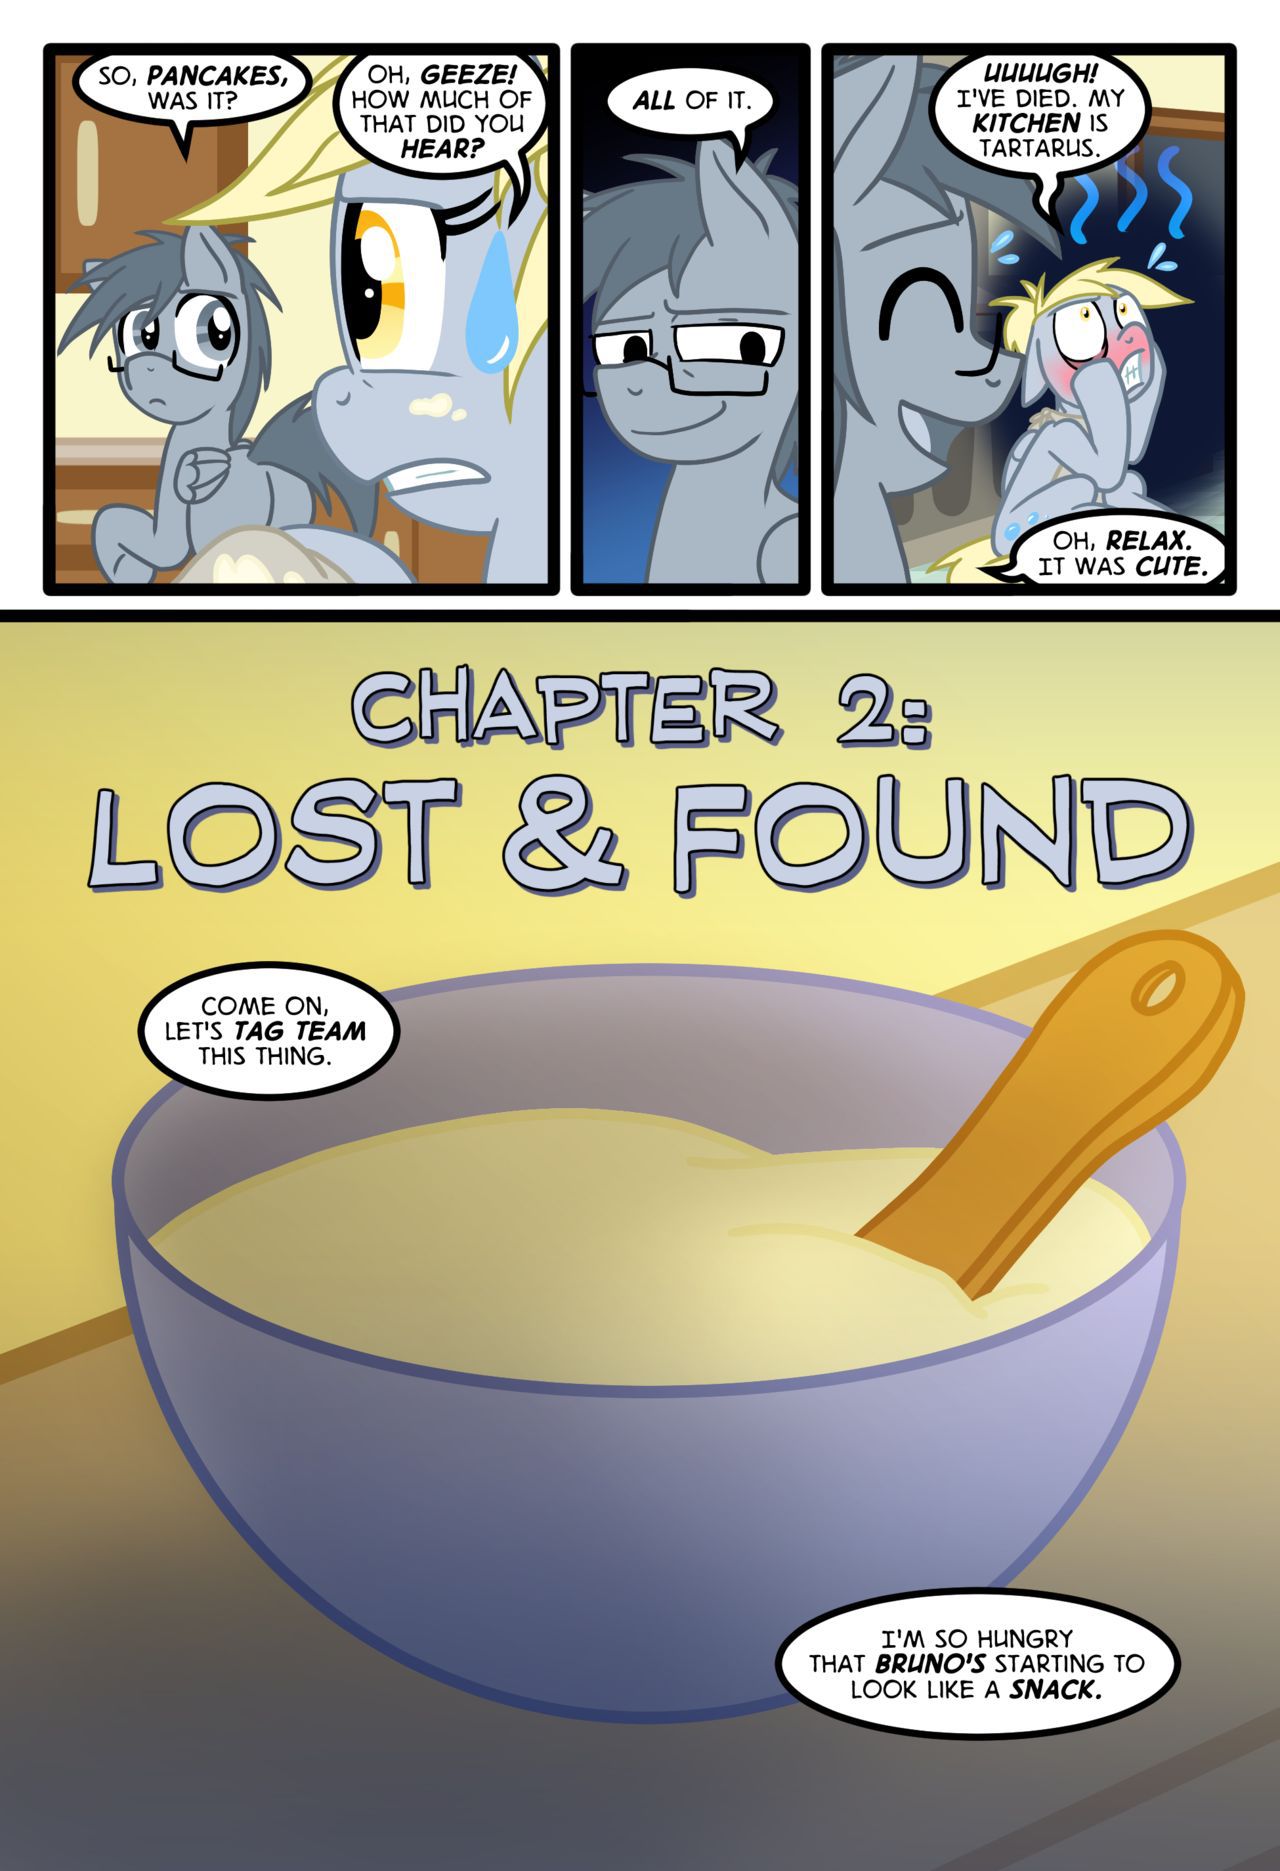 [Zaron] Lonely Hooves (My Little Pony Friendship Is Magic) [Ongoing] 79